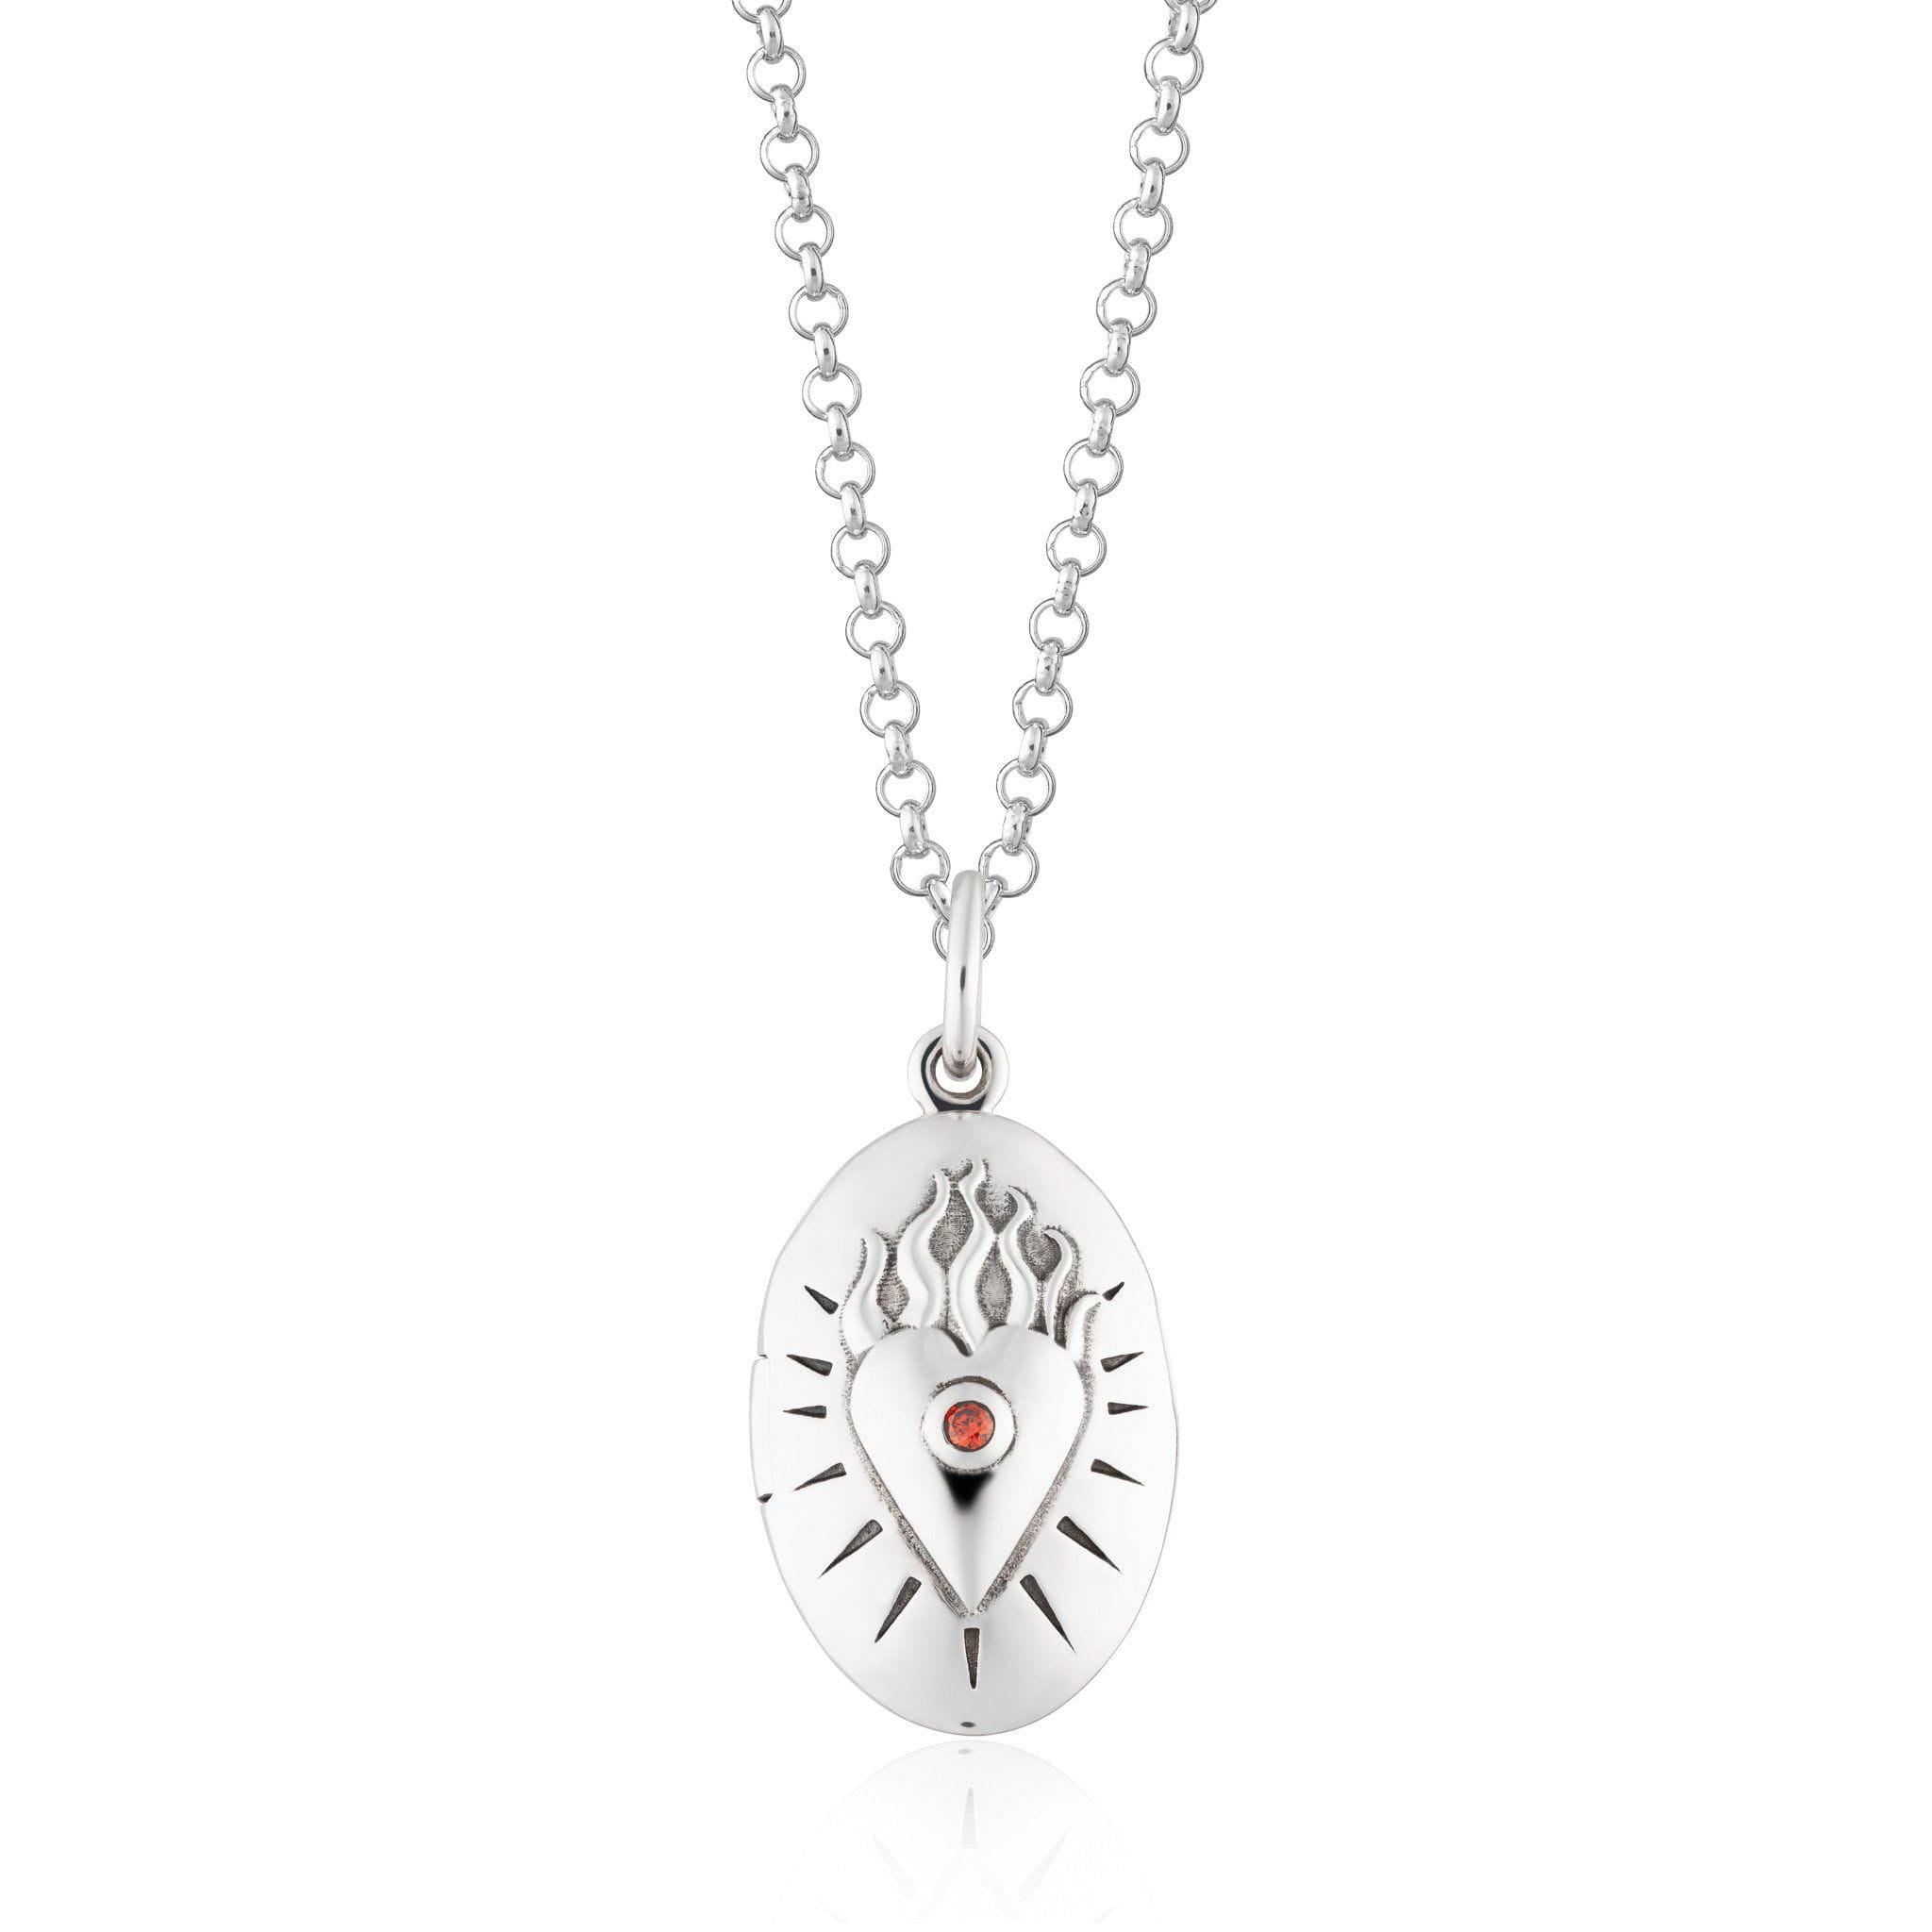 Flaming Heart Locket Necklace | Love Pendant Necklaces for Women by Scream Pretty